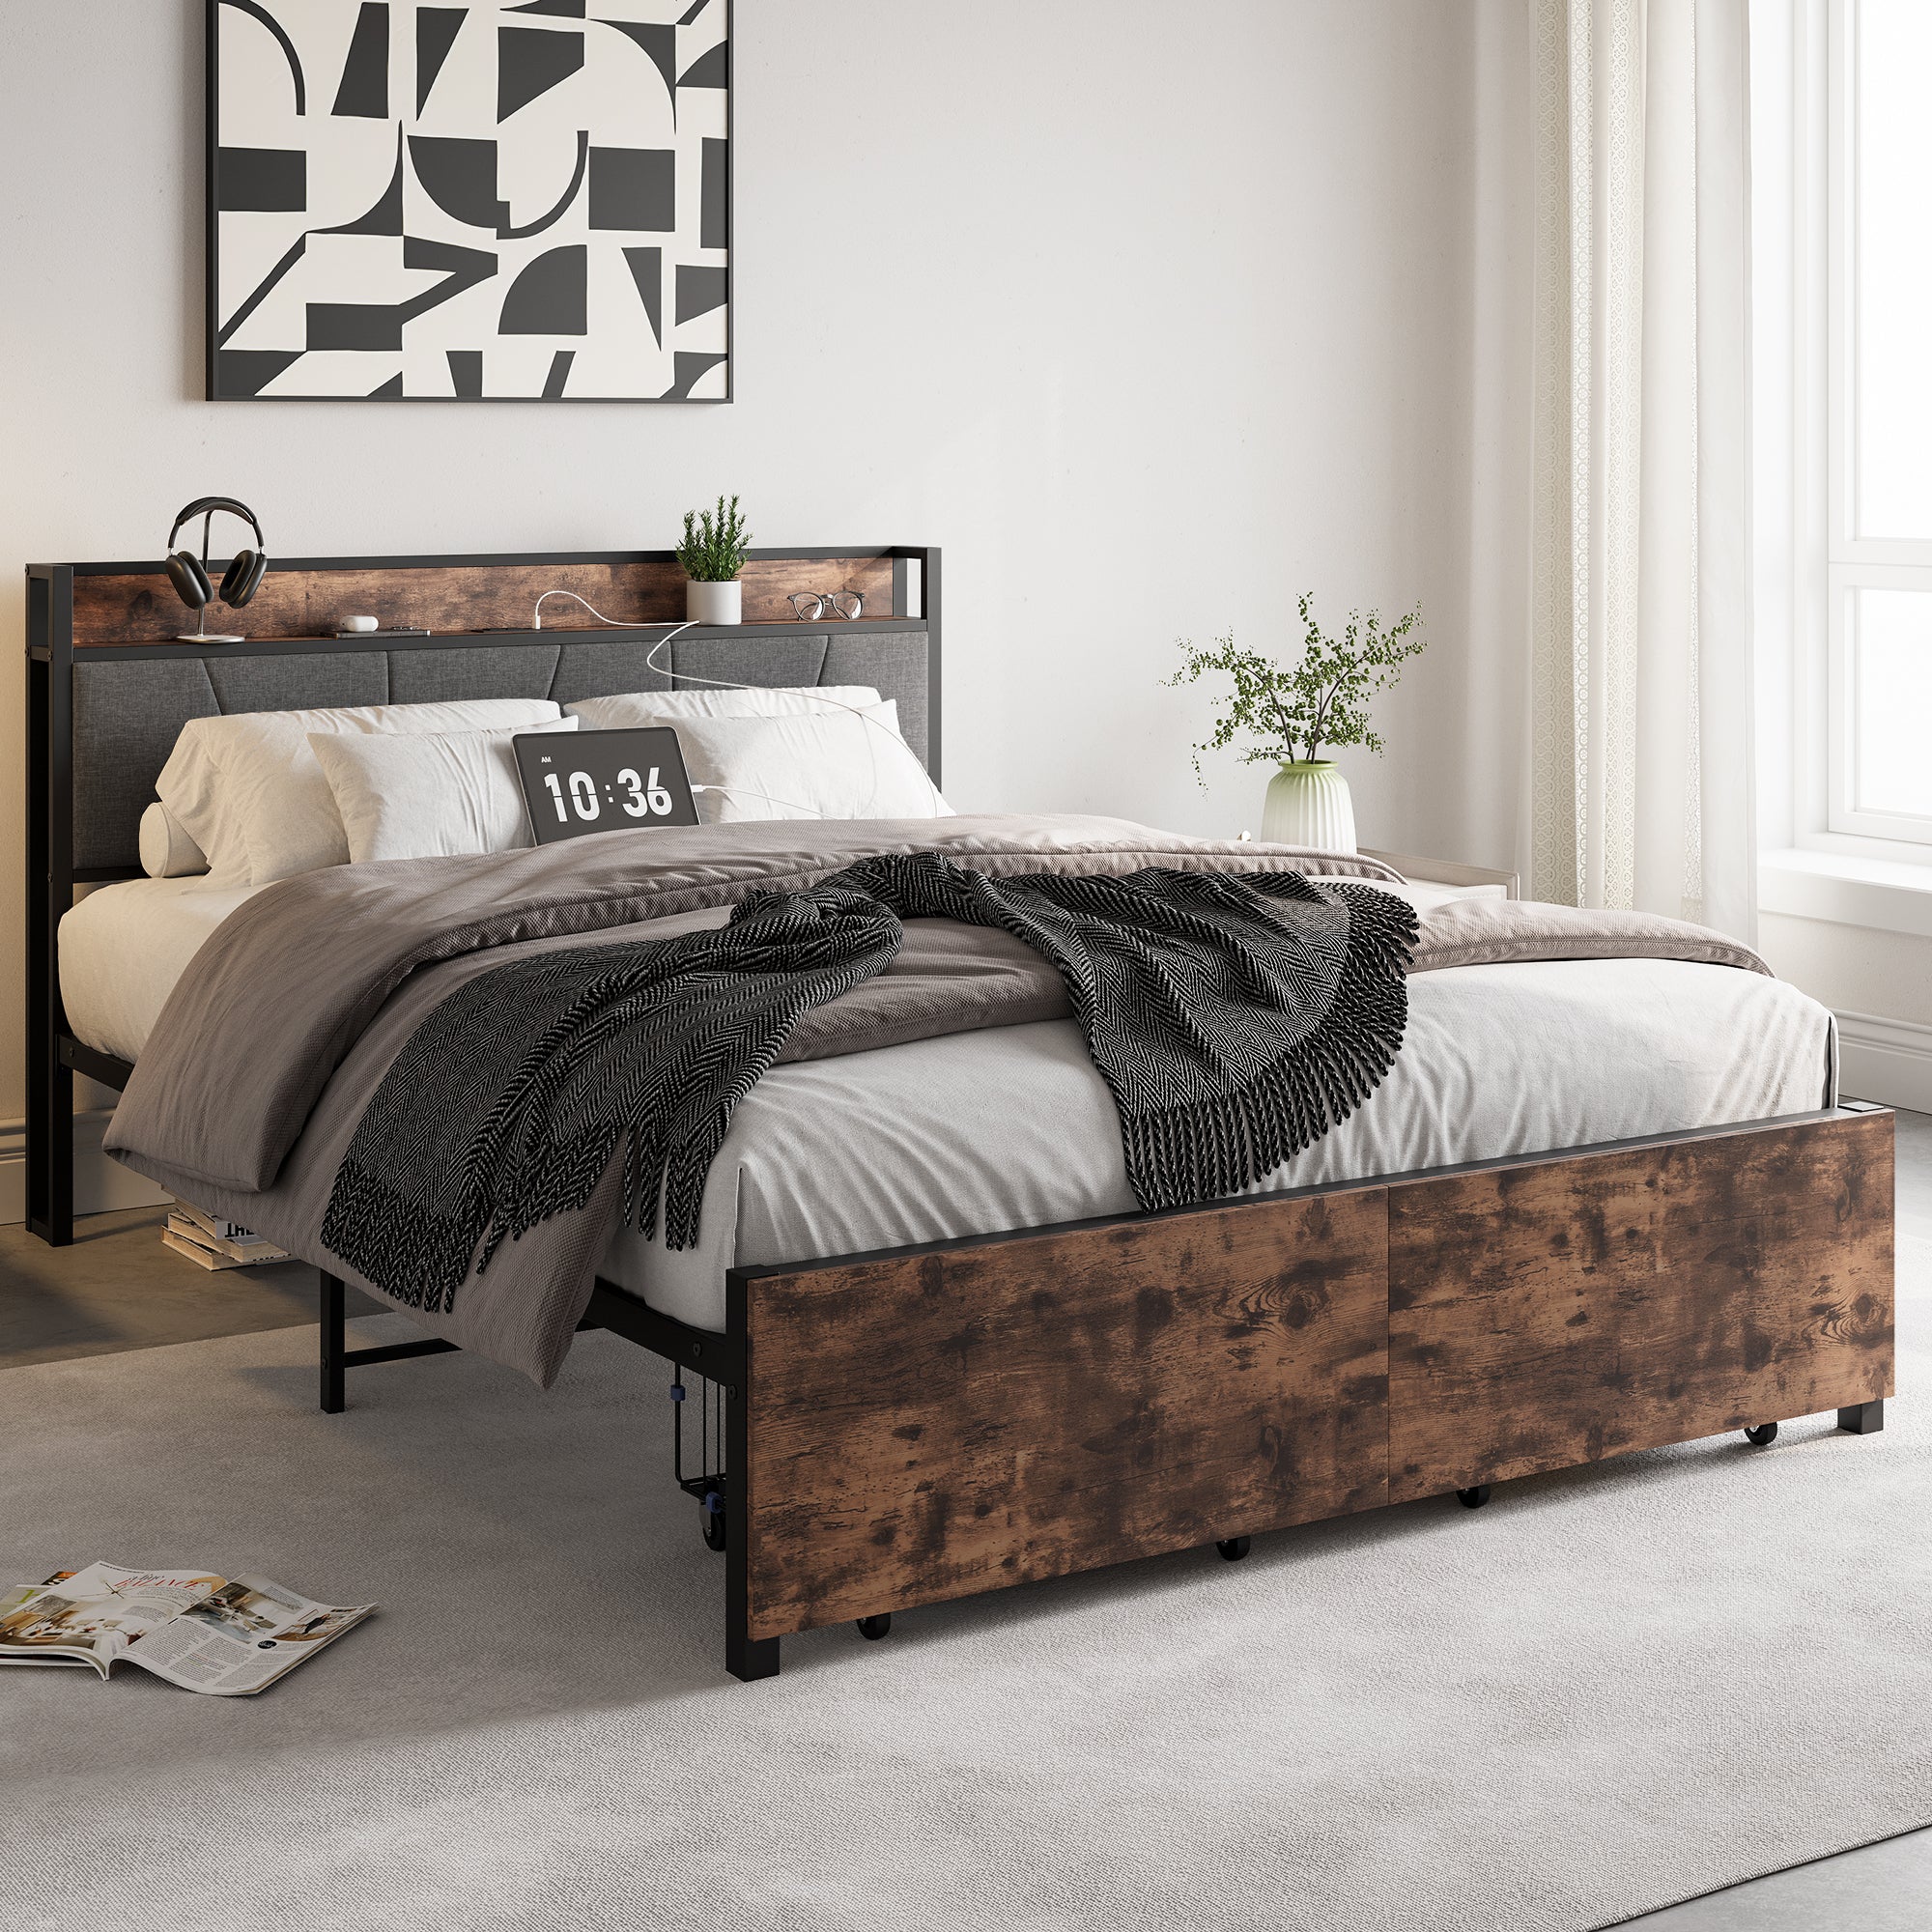 Queen Size Bed Frame, Storage Headboard with Charging box spring not